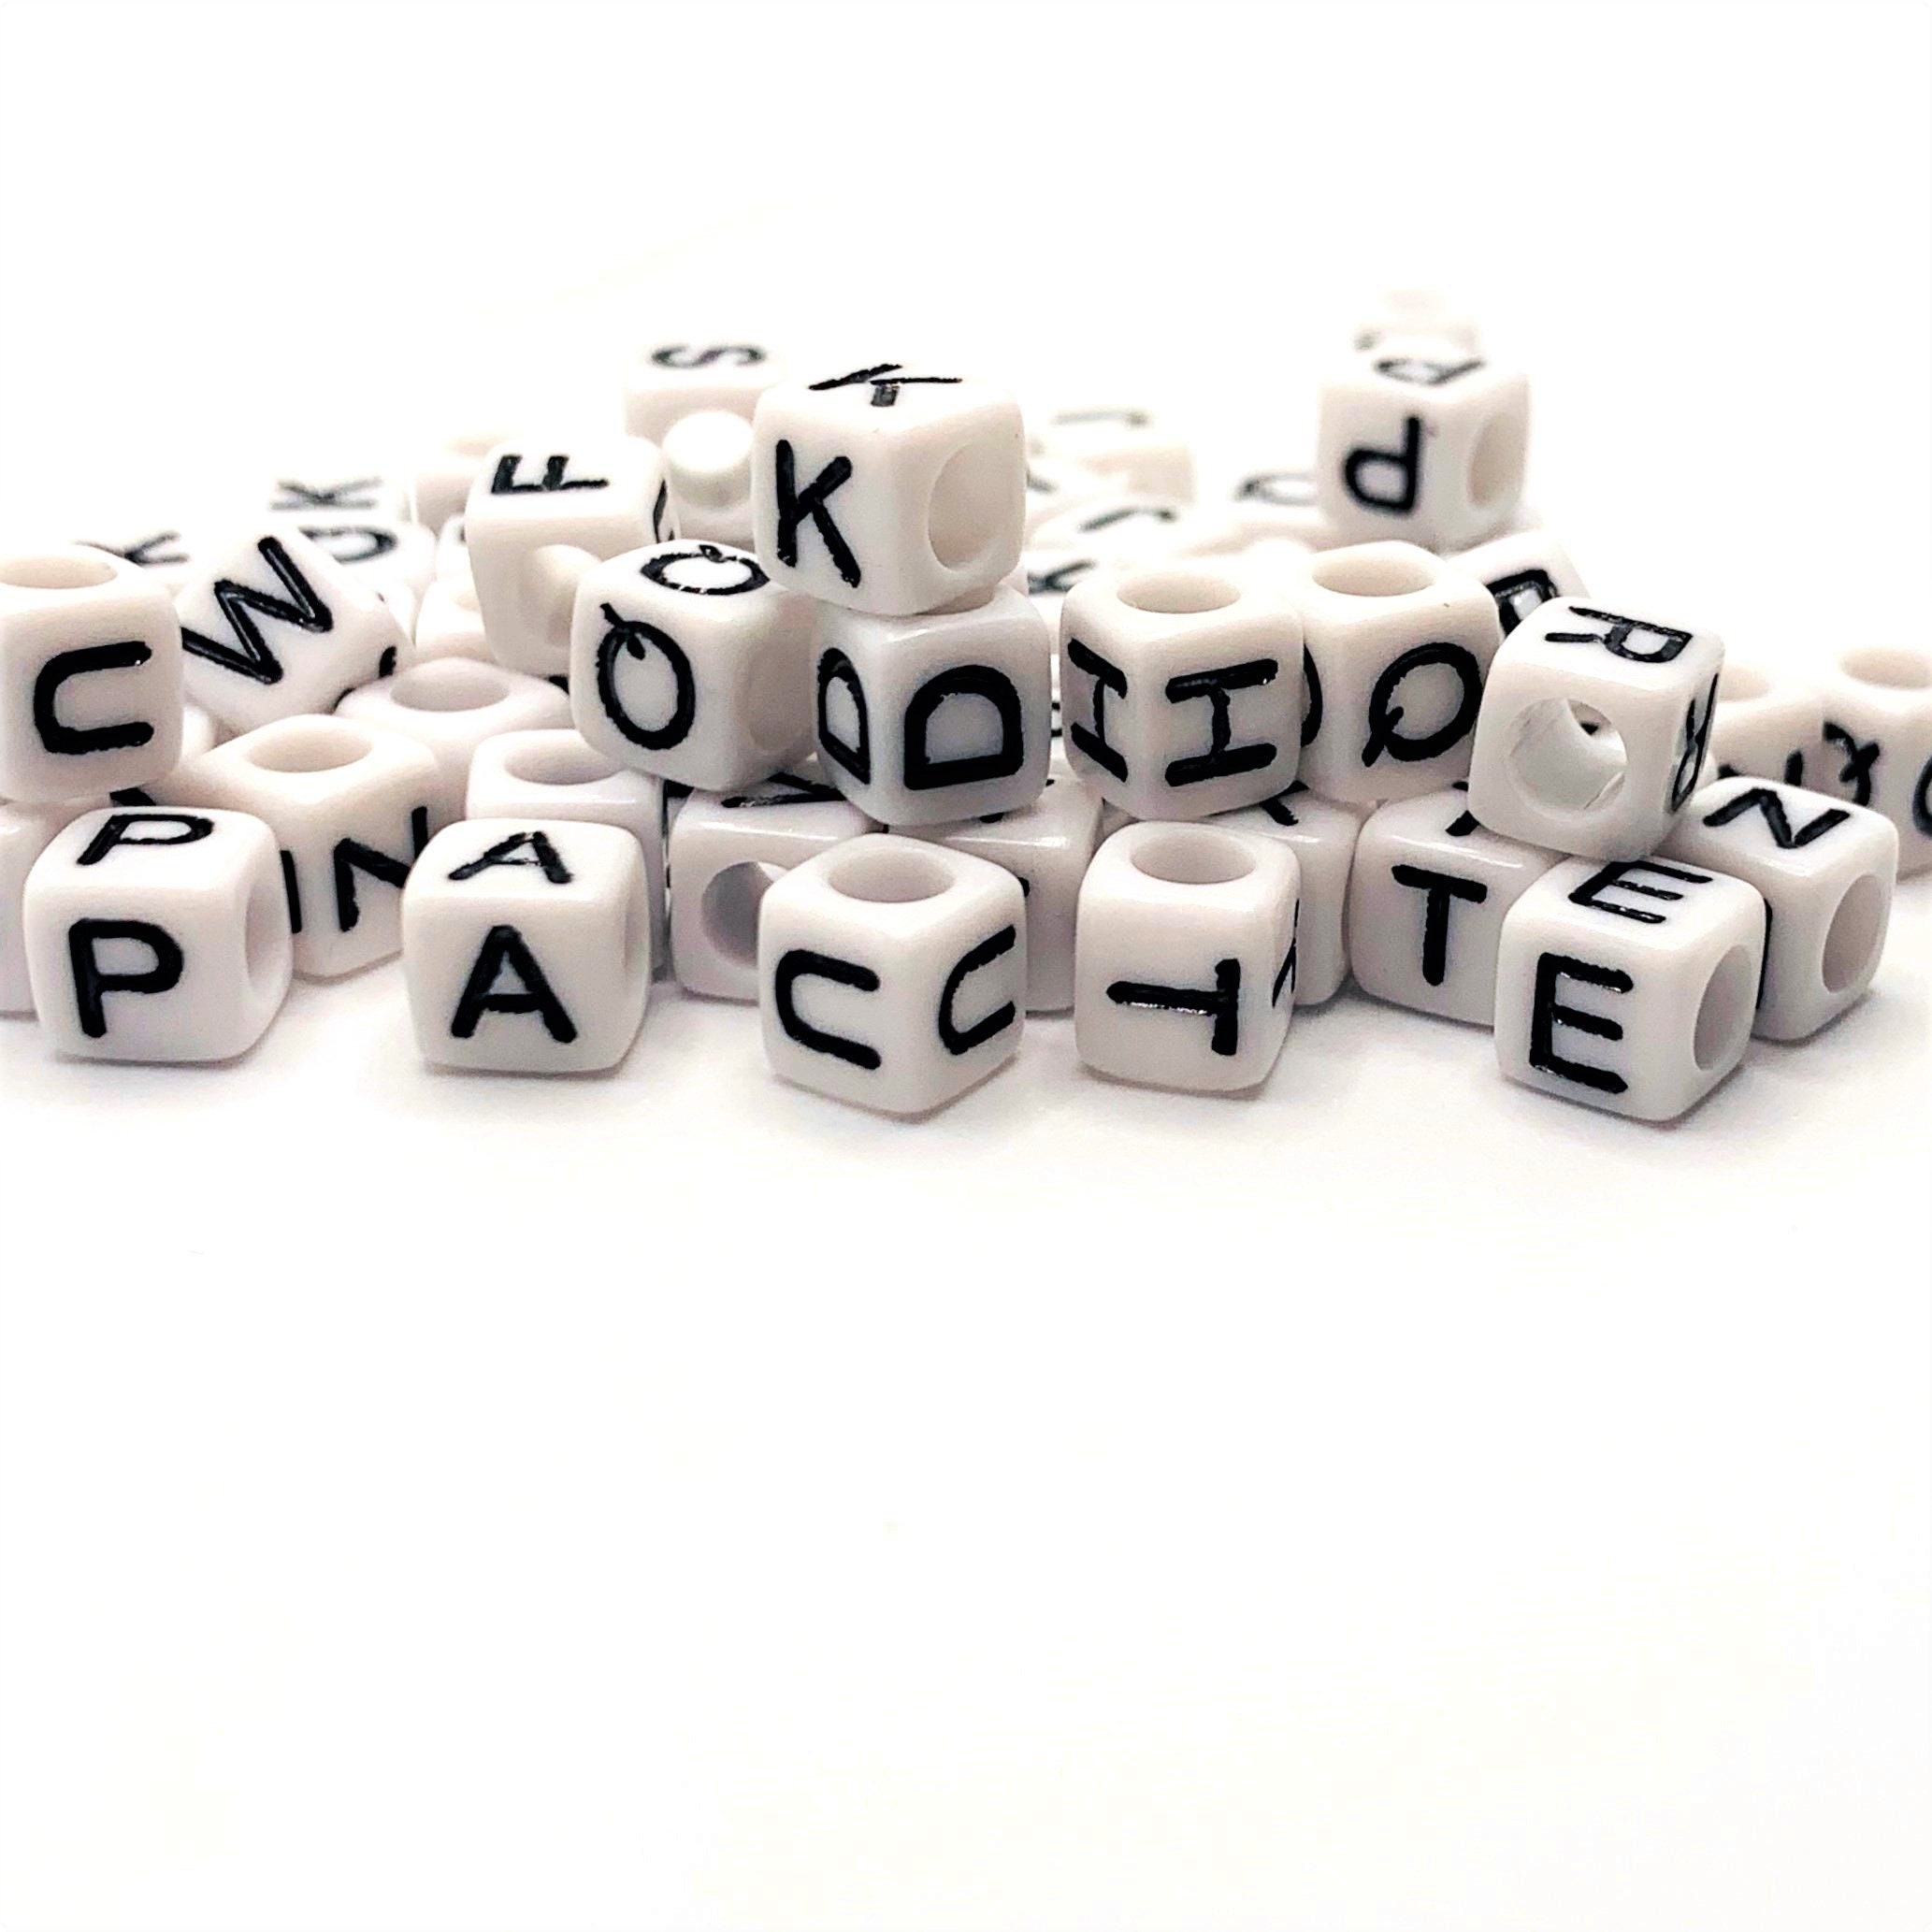 Word Calcium Made of Colorful Plastic Beads with Letters, Top View Stock  Photo - Image of chemistry, illness: 263476554